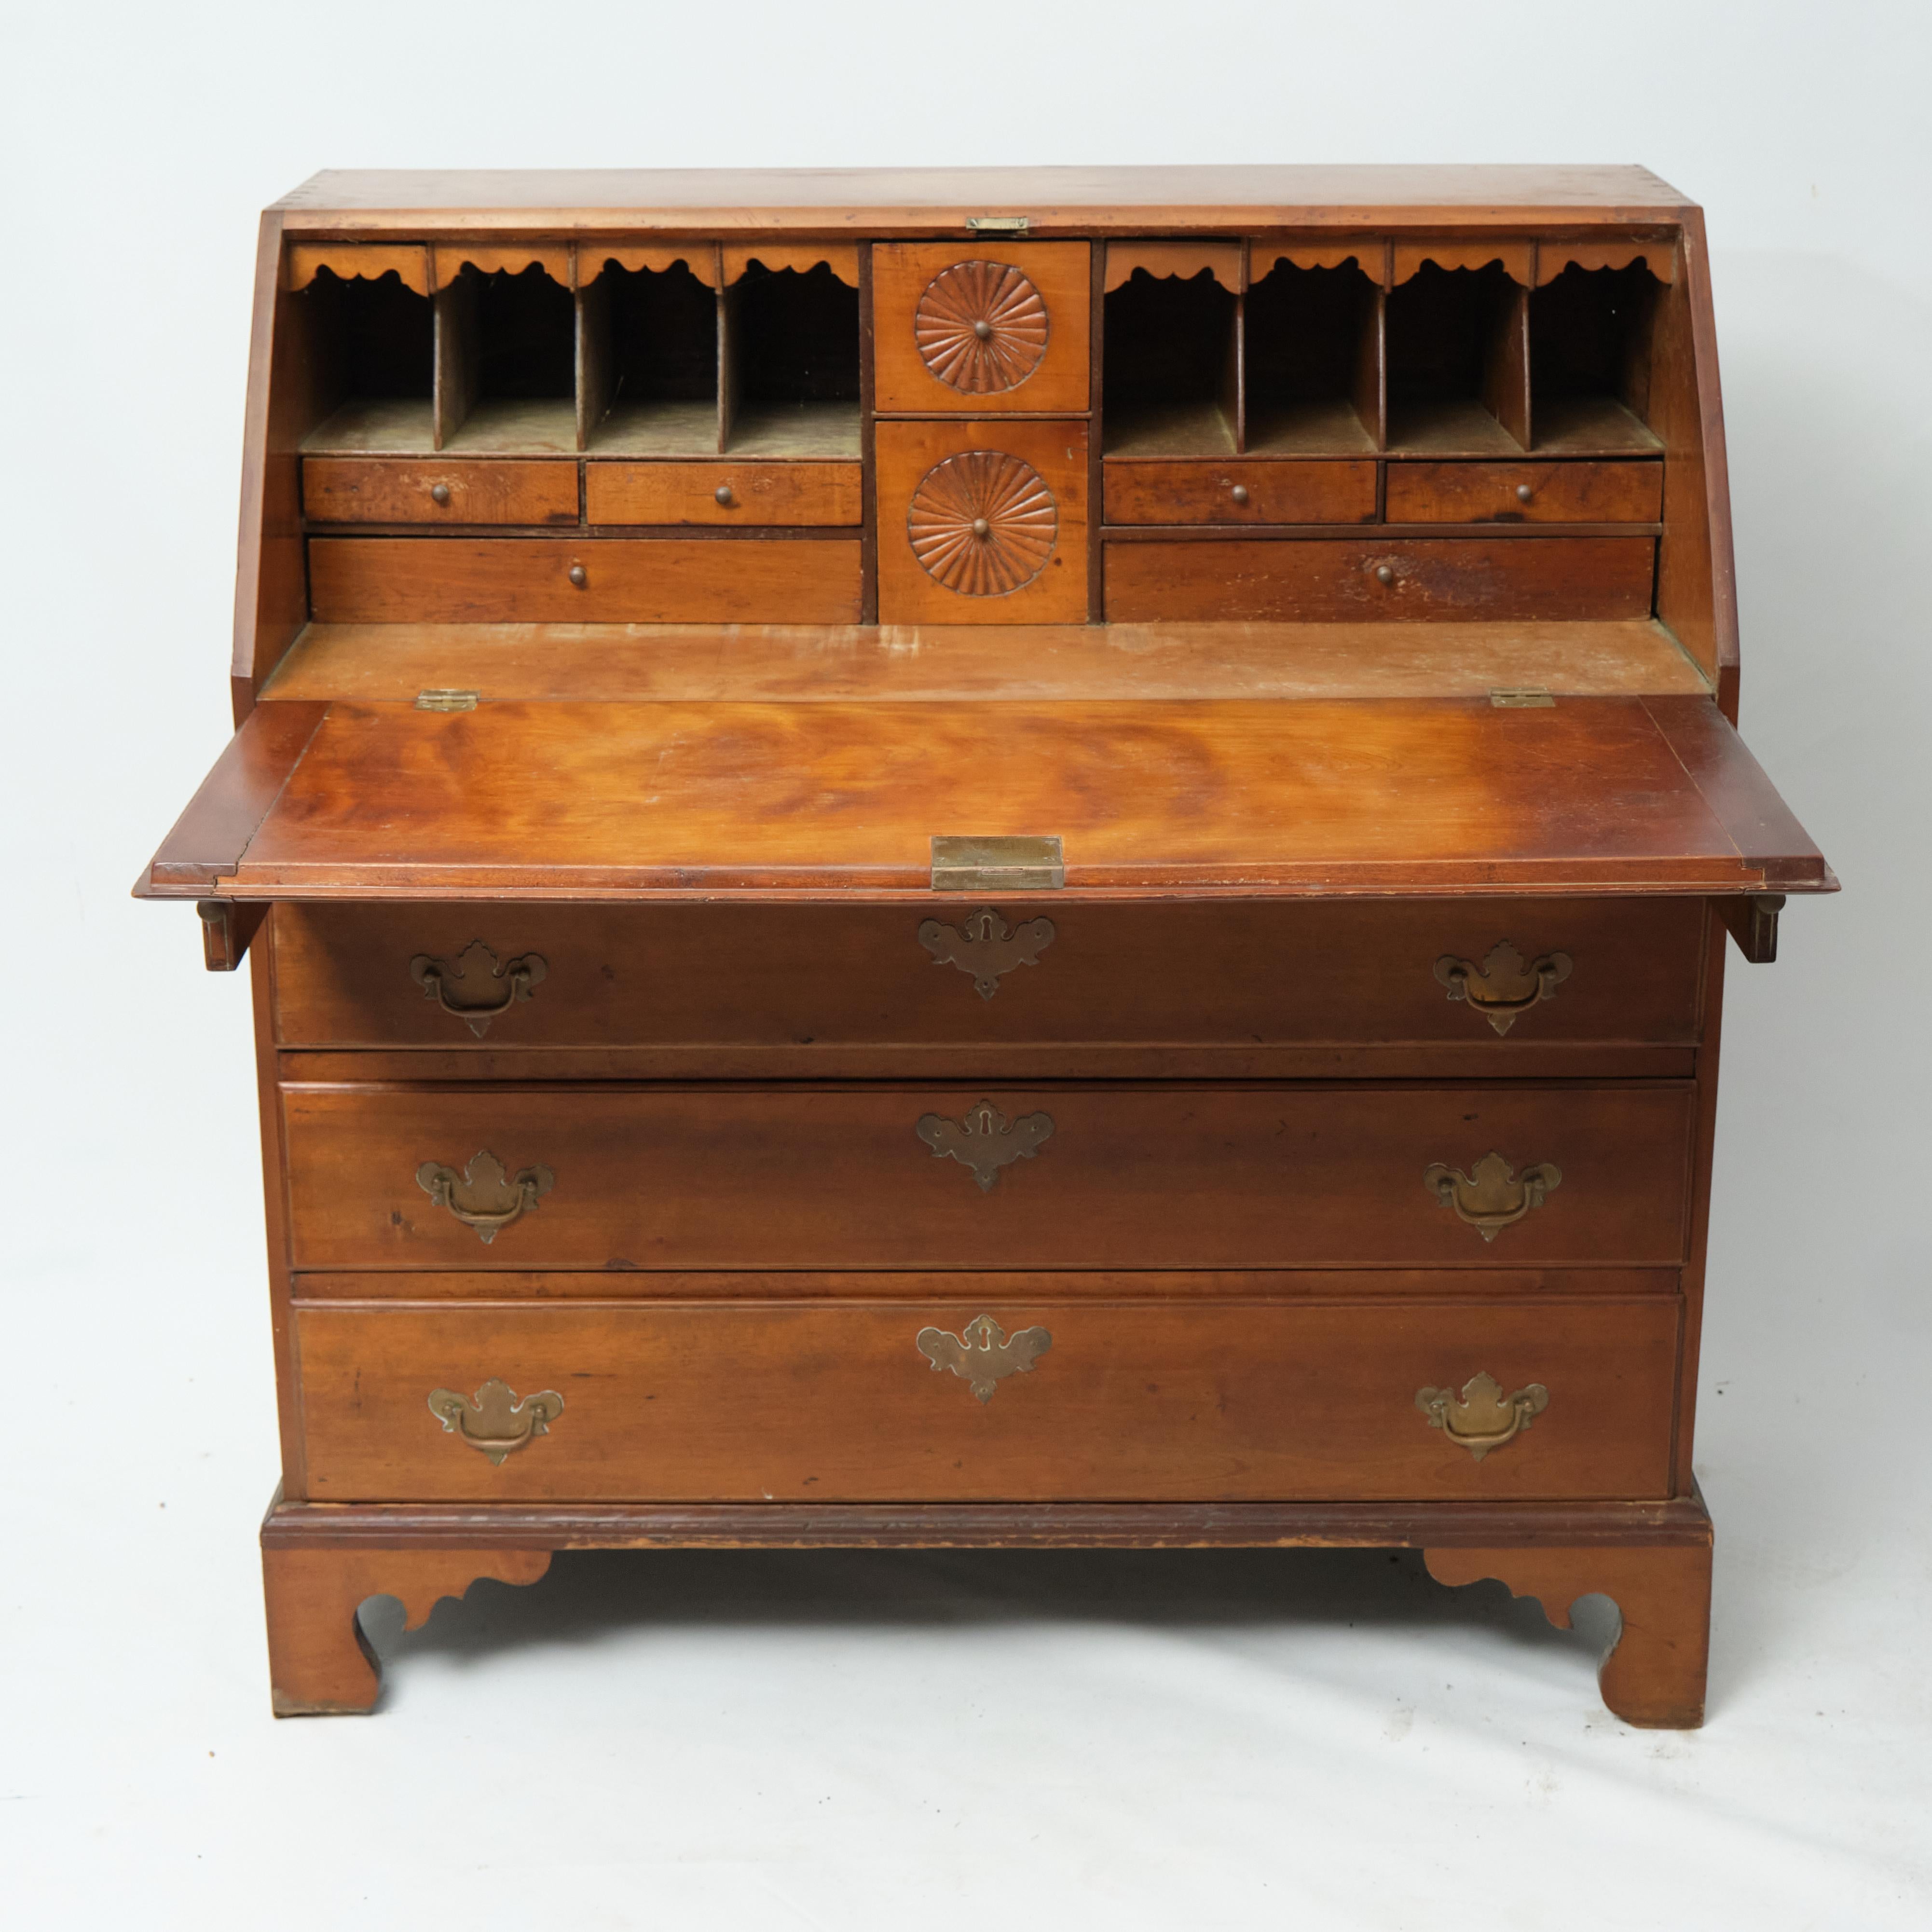 American Chippendale Maple Slant-Front Desk, Late 18th or Early 19th Century For Sale 1